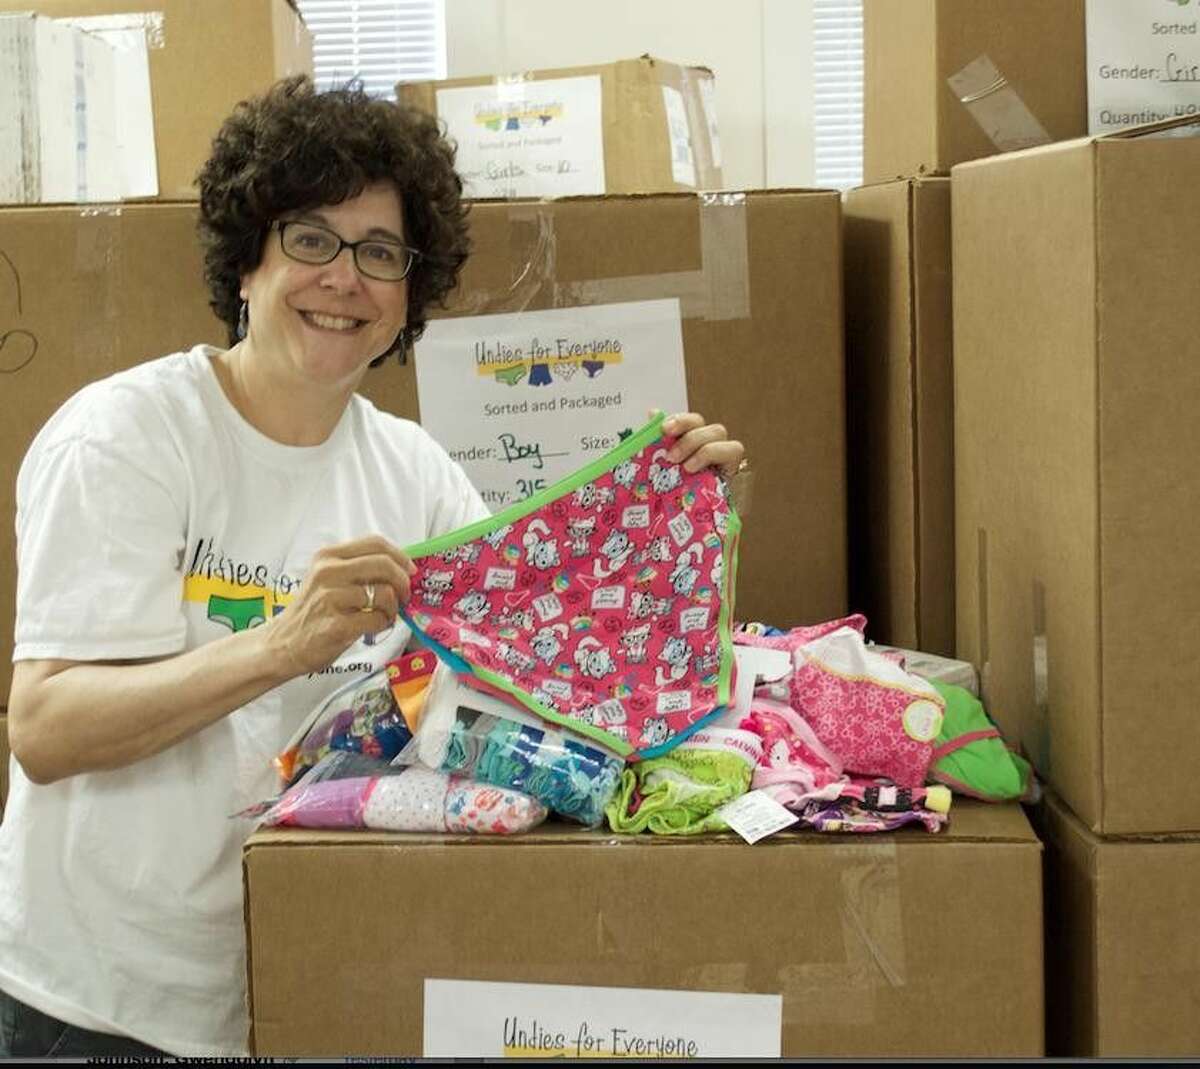 “I may be the only underwear rabbinate in the country -- shocking, isn’t it?” says Rabbi Amy Weiss, who founded Undies for Everyone in 2008 to make sure disadvantaged children have the same basic dignity that everyone enjoys. Since its inception, Undies for Everyone has given away 140,000 pairs of underwear to thousands of Houston children